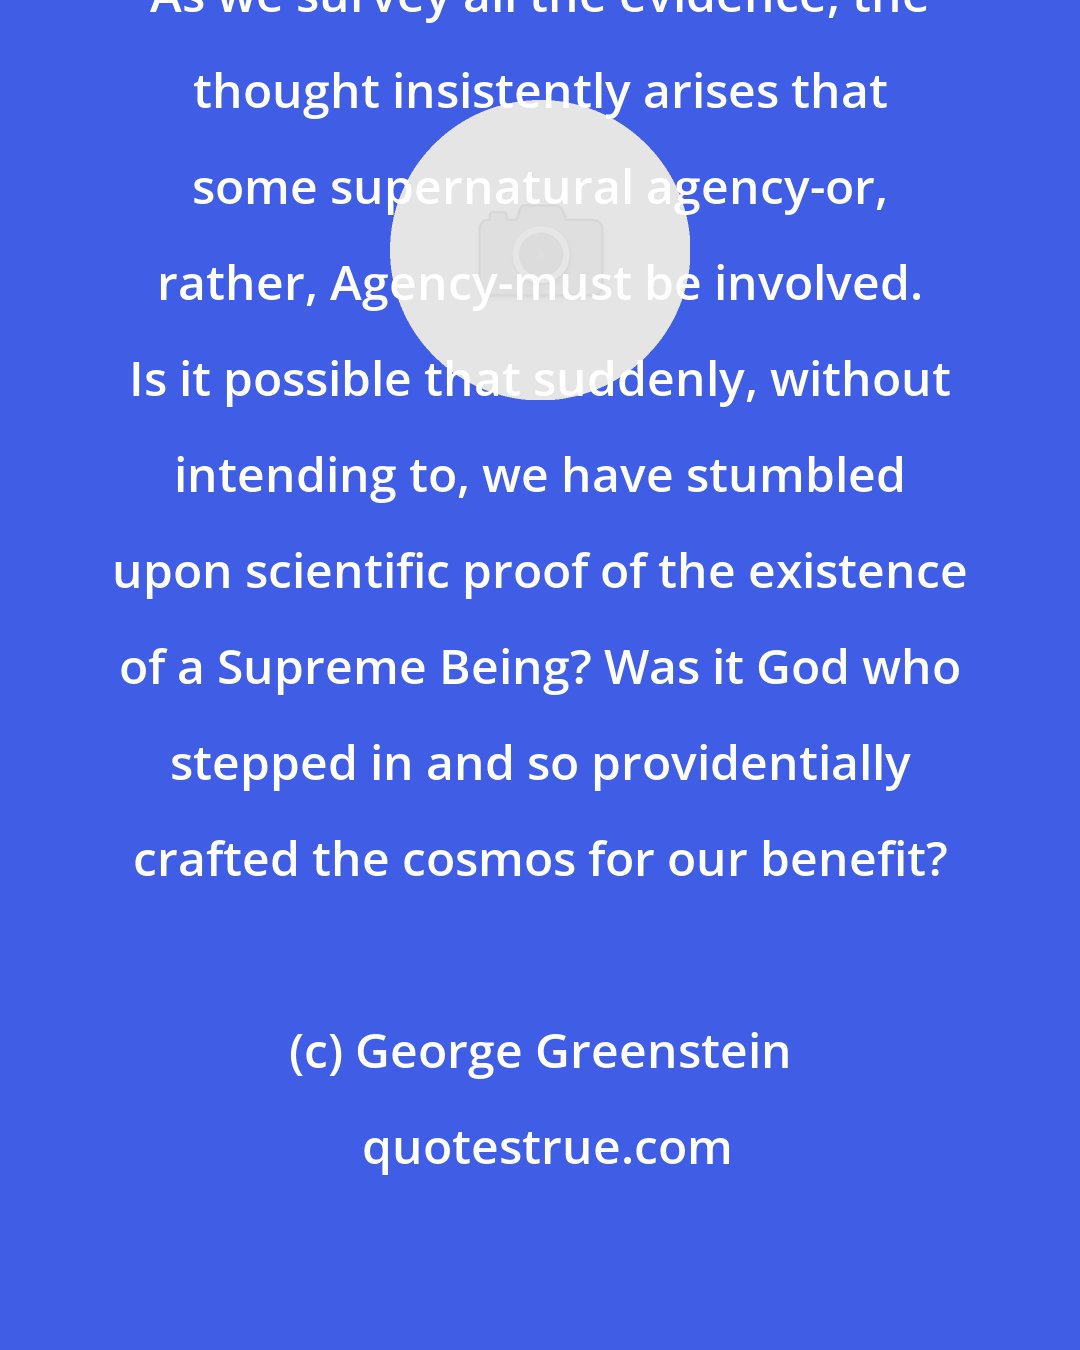 George Greenstein: As we survey all the evidence, the thought insistently arises that some supernatural agency-or, rather, Agency-must be involved. Is it possible that suddenly, without intending to, we have stumbled upon scientific proof of the existence of a Supreme Being? Was it God who stepped in and so providentially crafted the cosmos for our benefit?